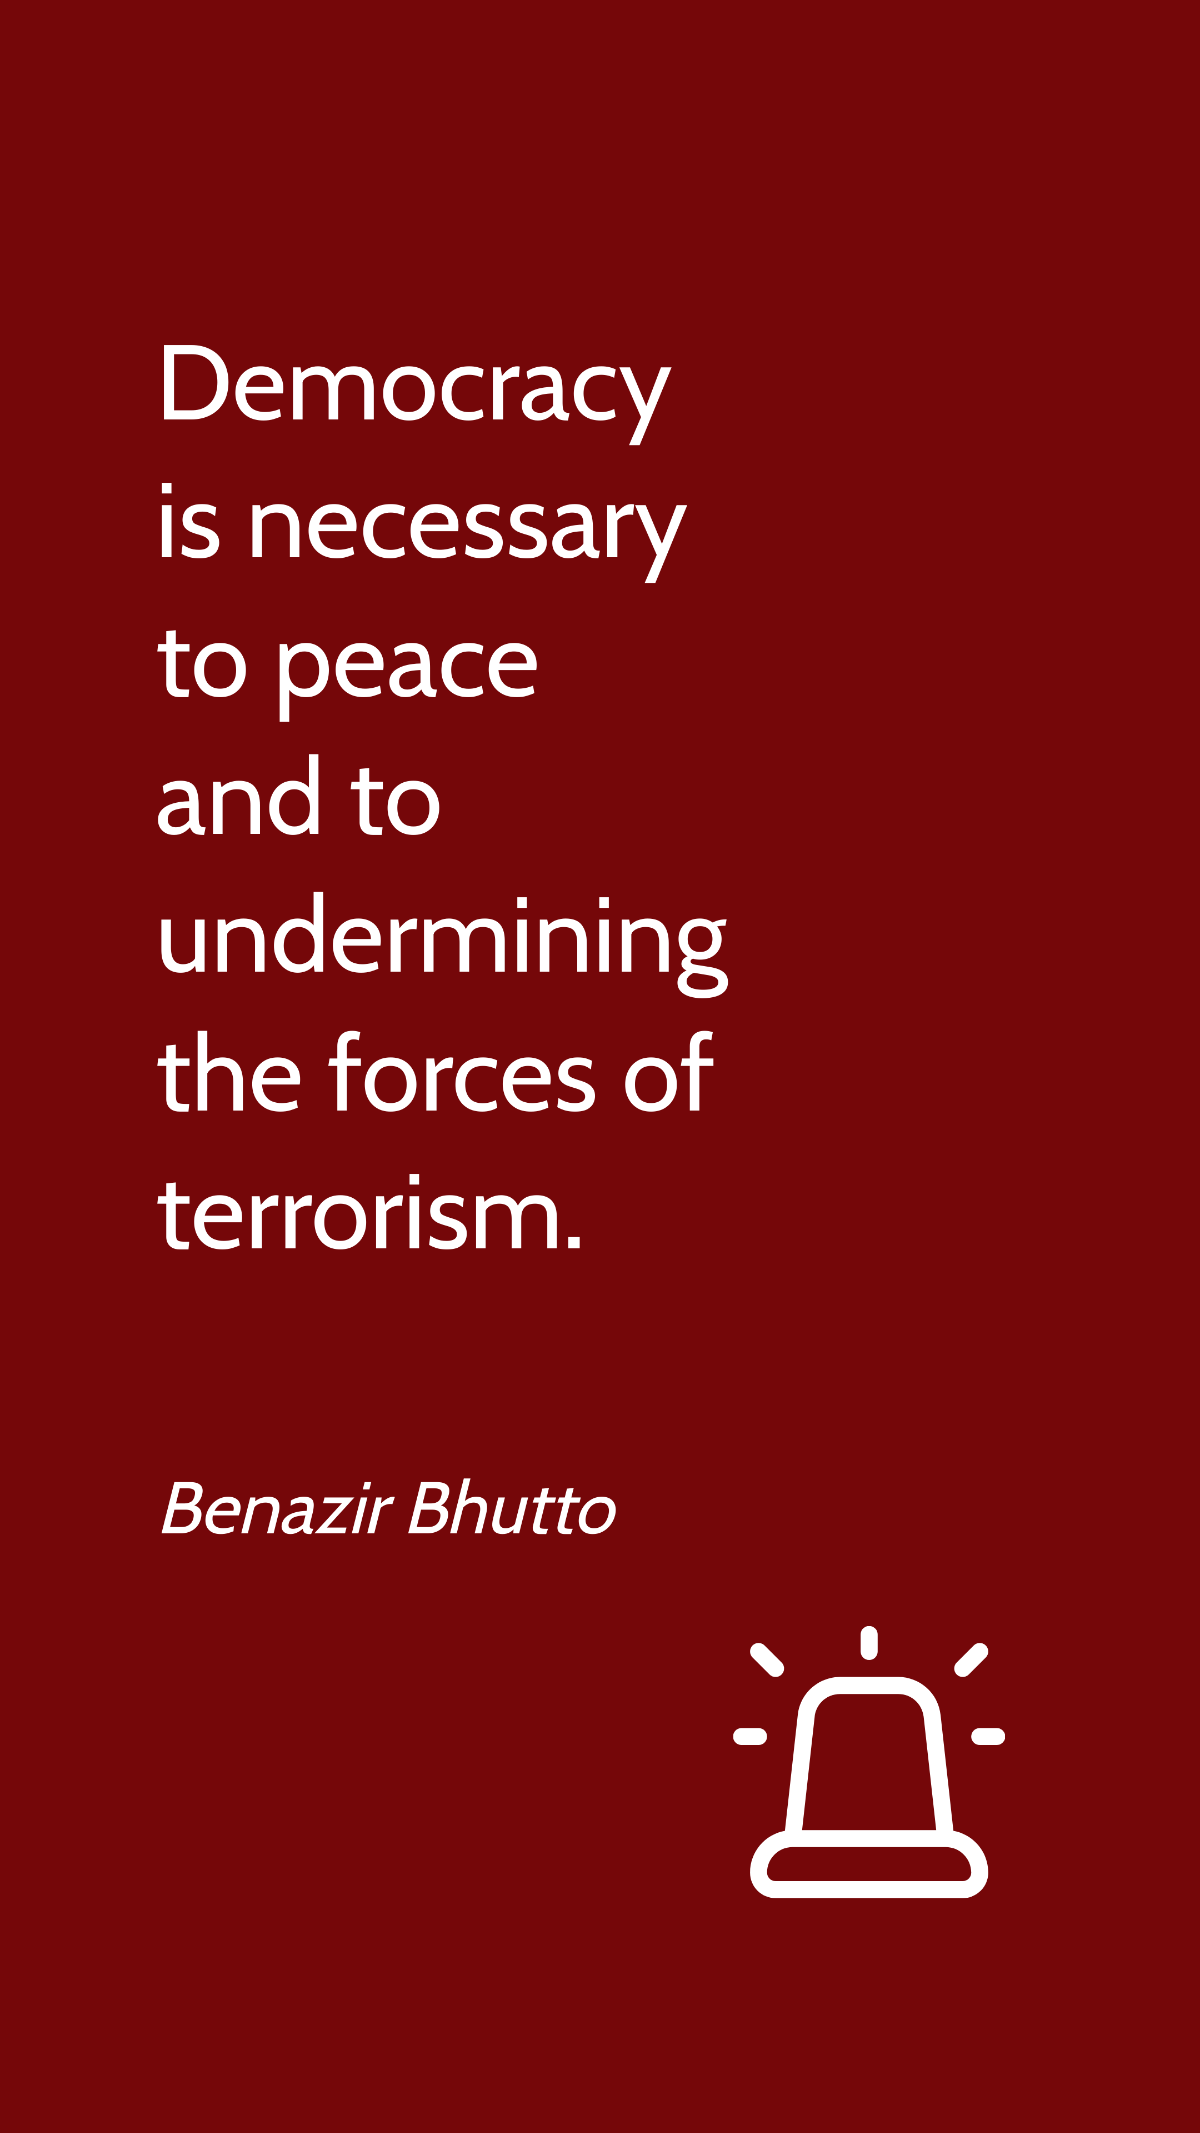 Benazir Bhutto - Democracy is necessary to peace and to undermining the forces of terrorism.